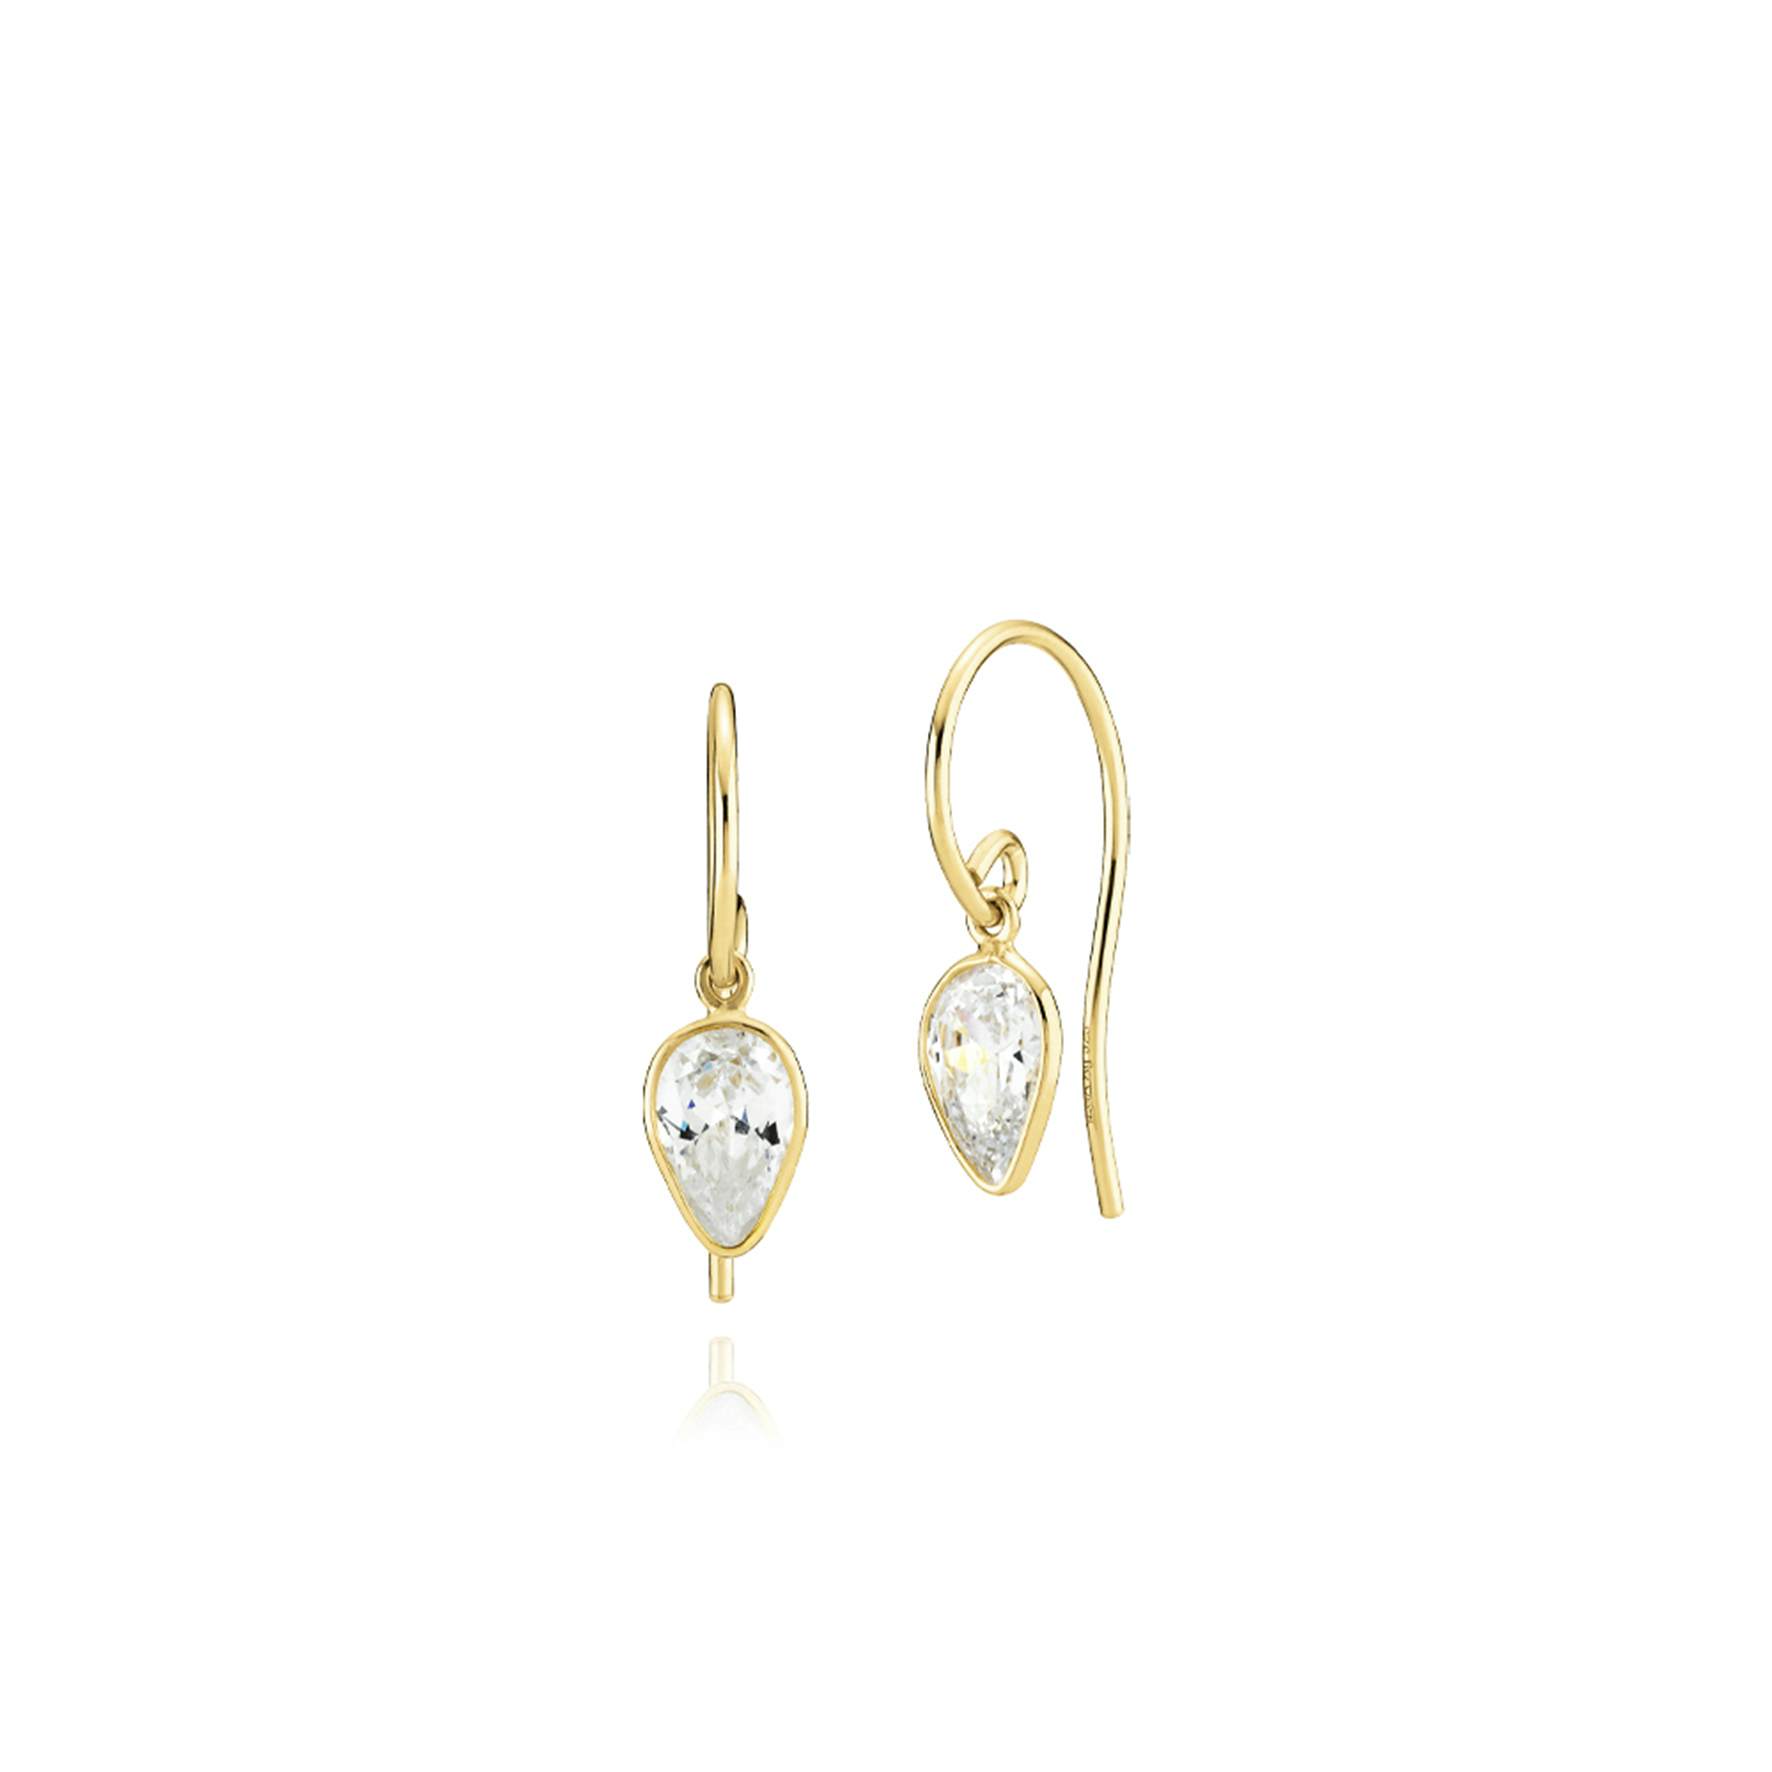 Aya Small Earrings from Izabel Camille in Goldplated-Silver Sterling 925